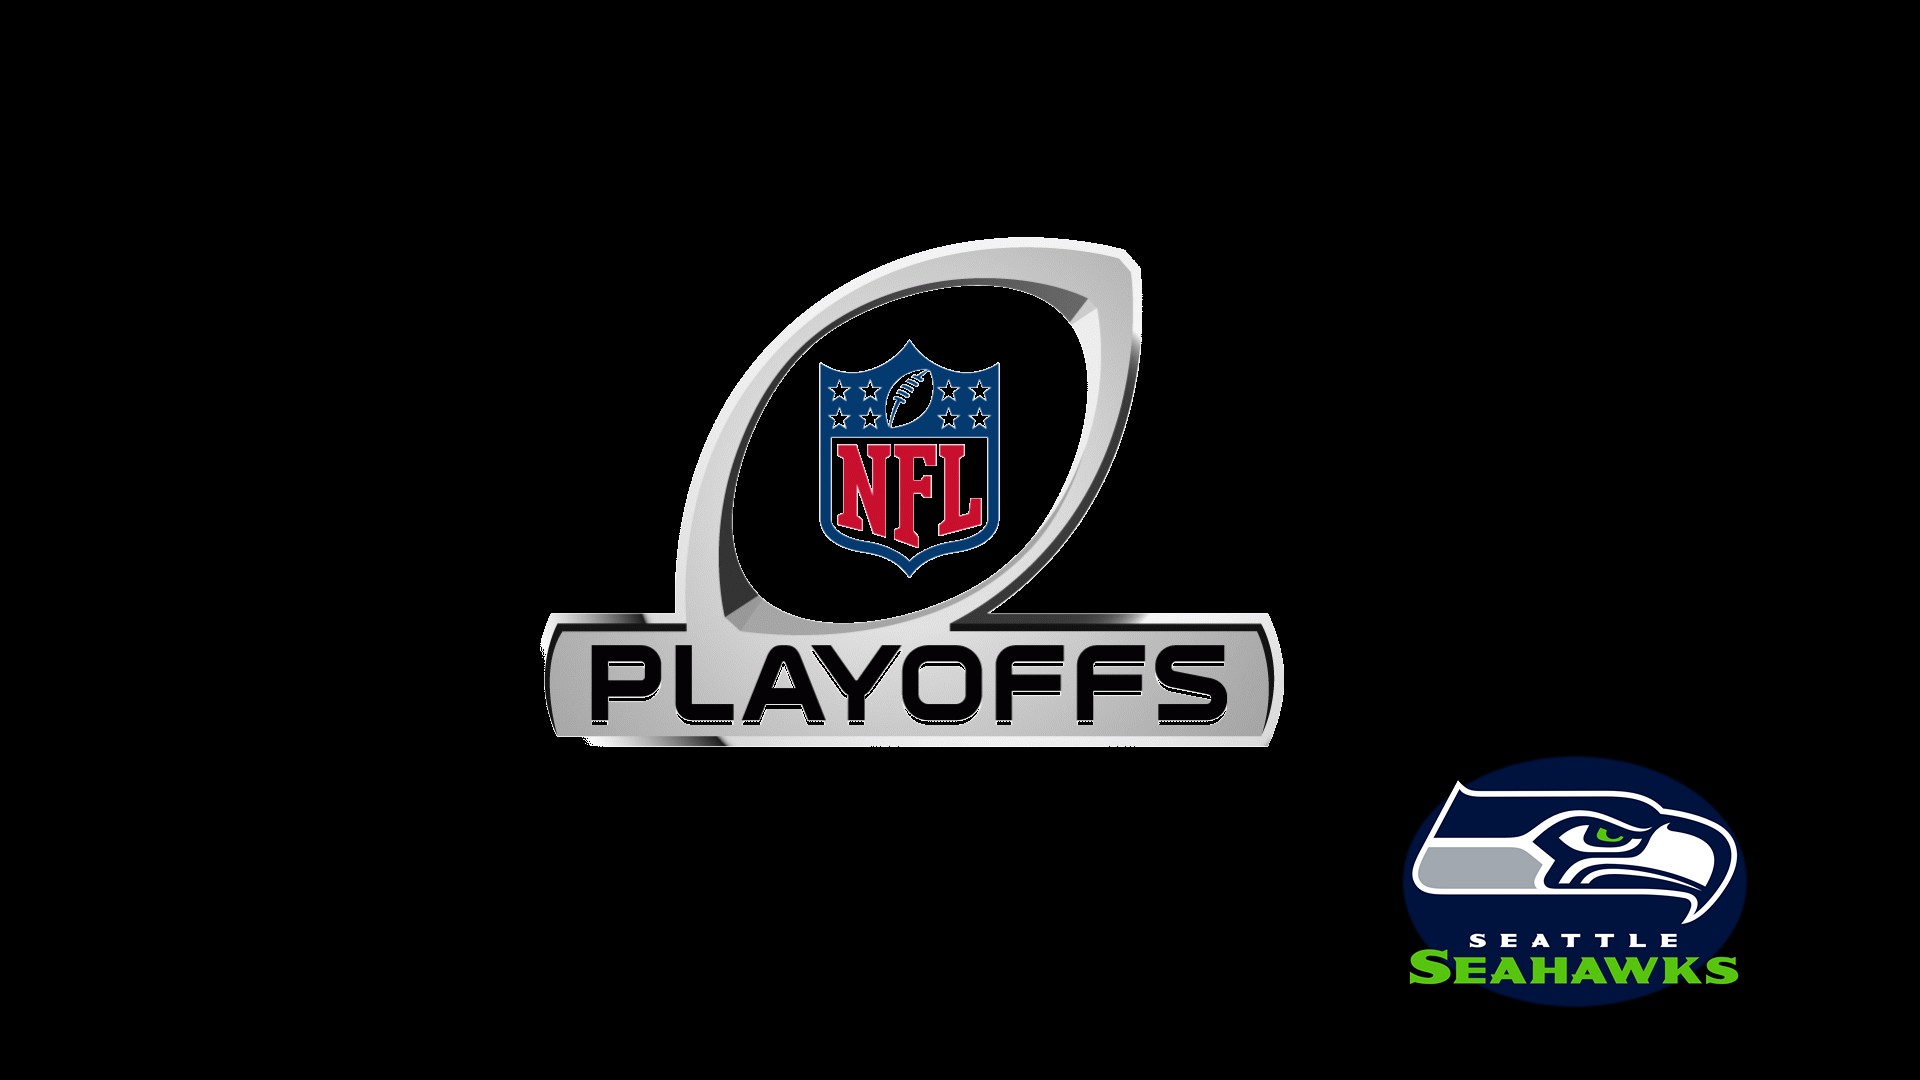 Seattle Seahawks Nfl 1920x1080 Hd Images